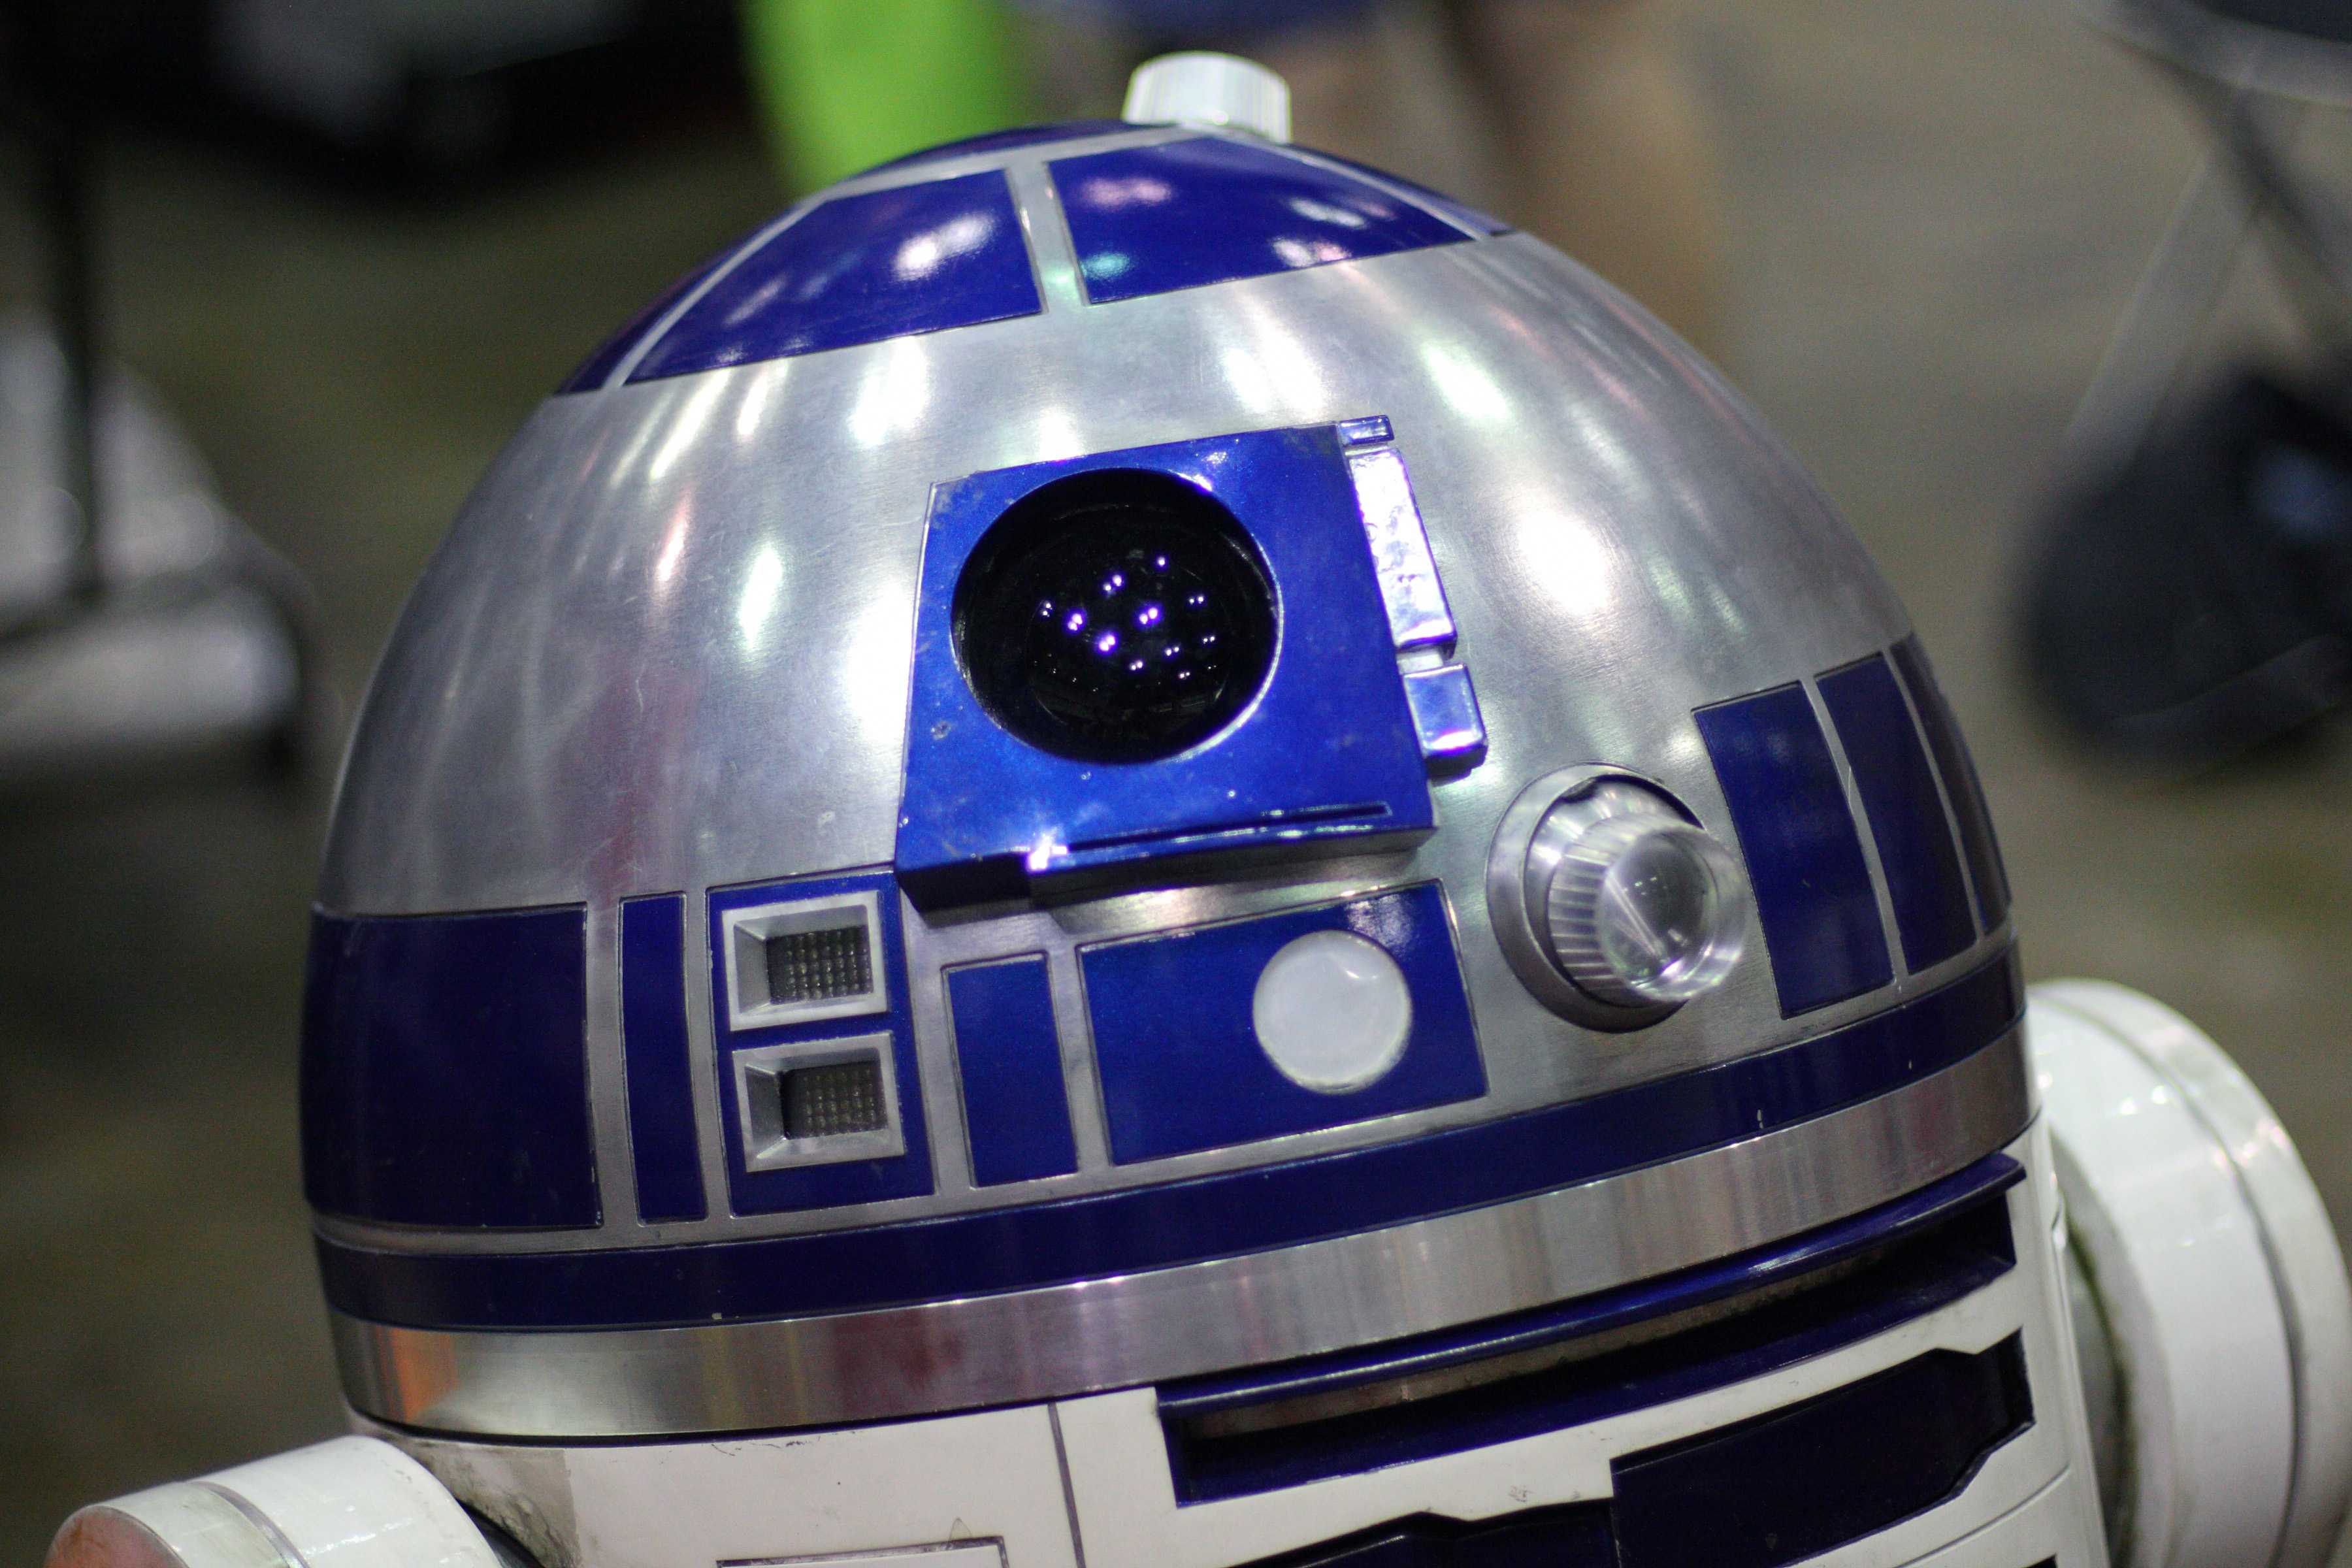 Sorry, but R2-D2 and BB-8 wouldn't be too useful in real life